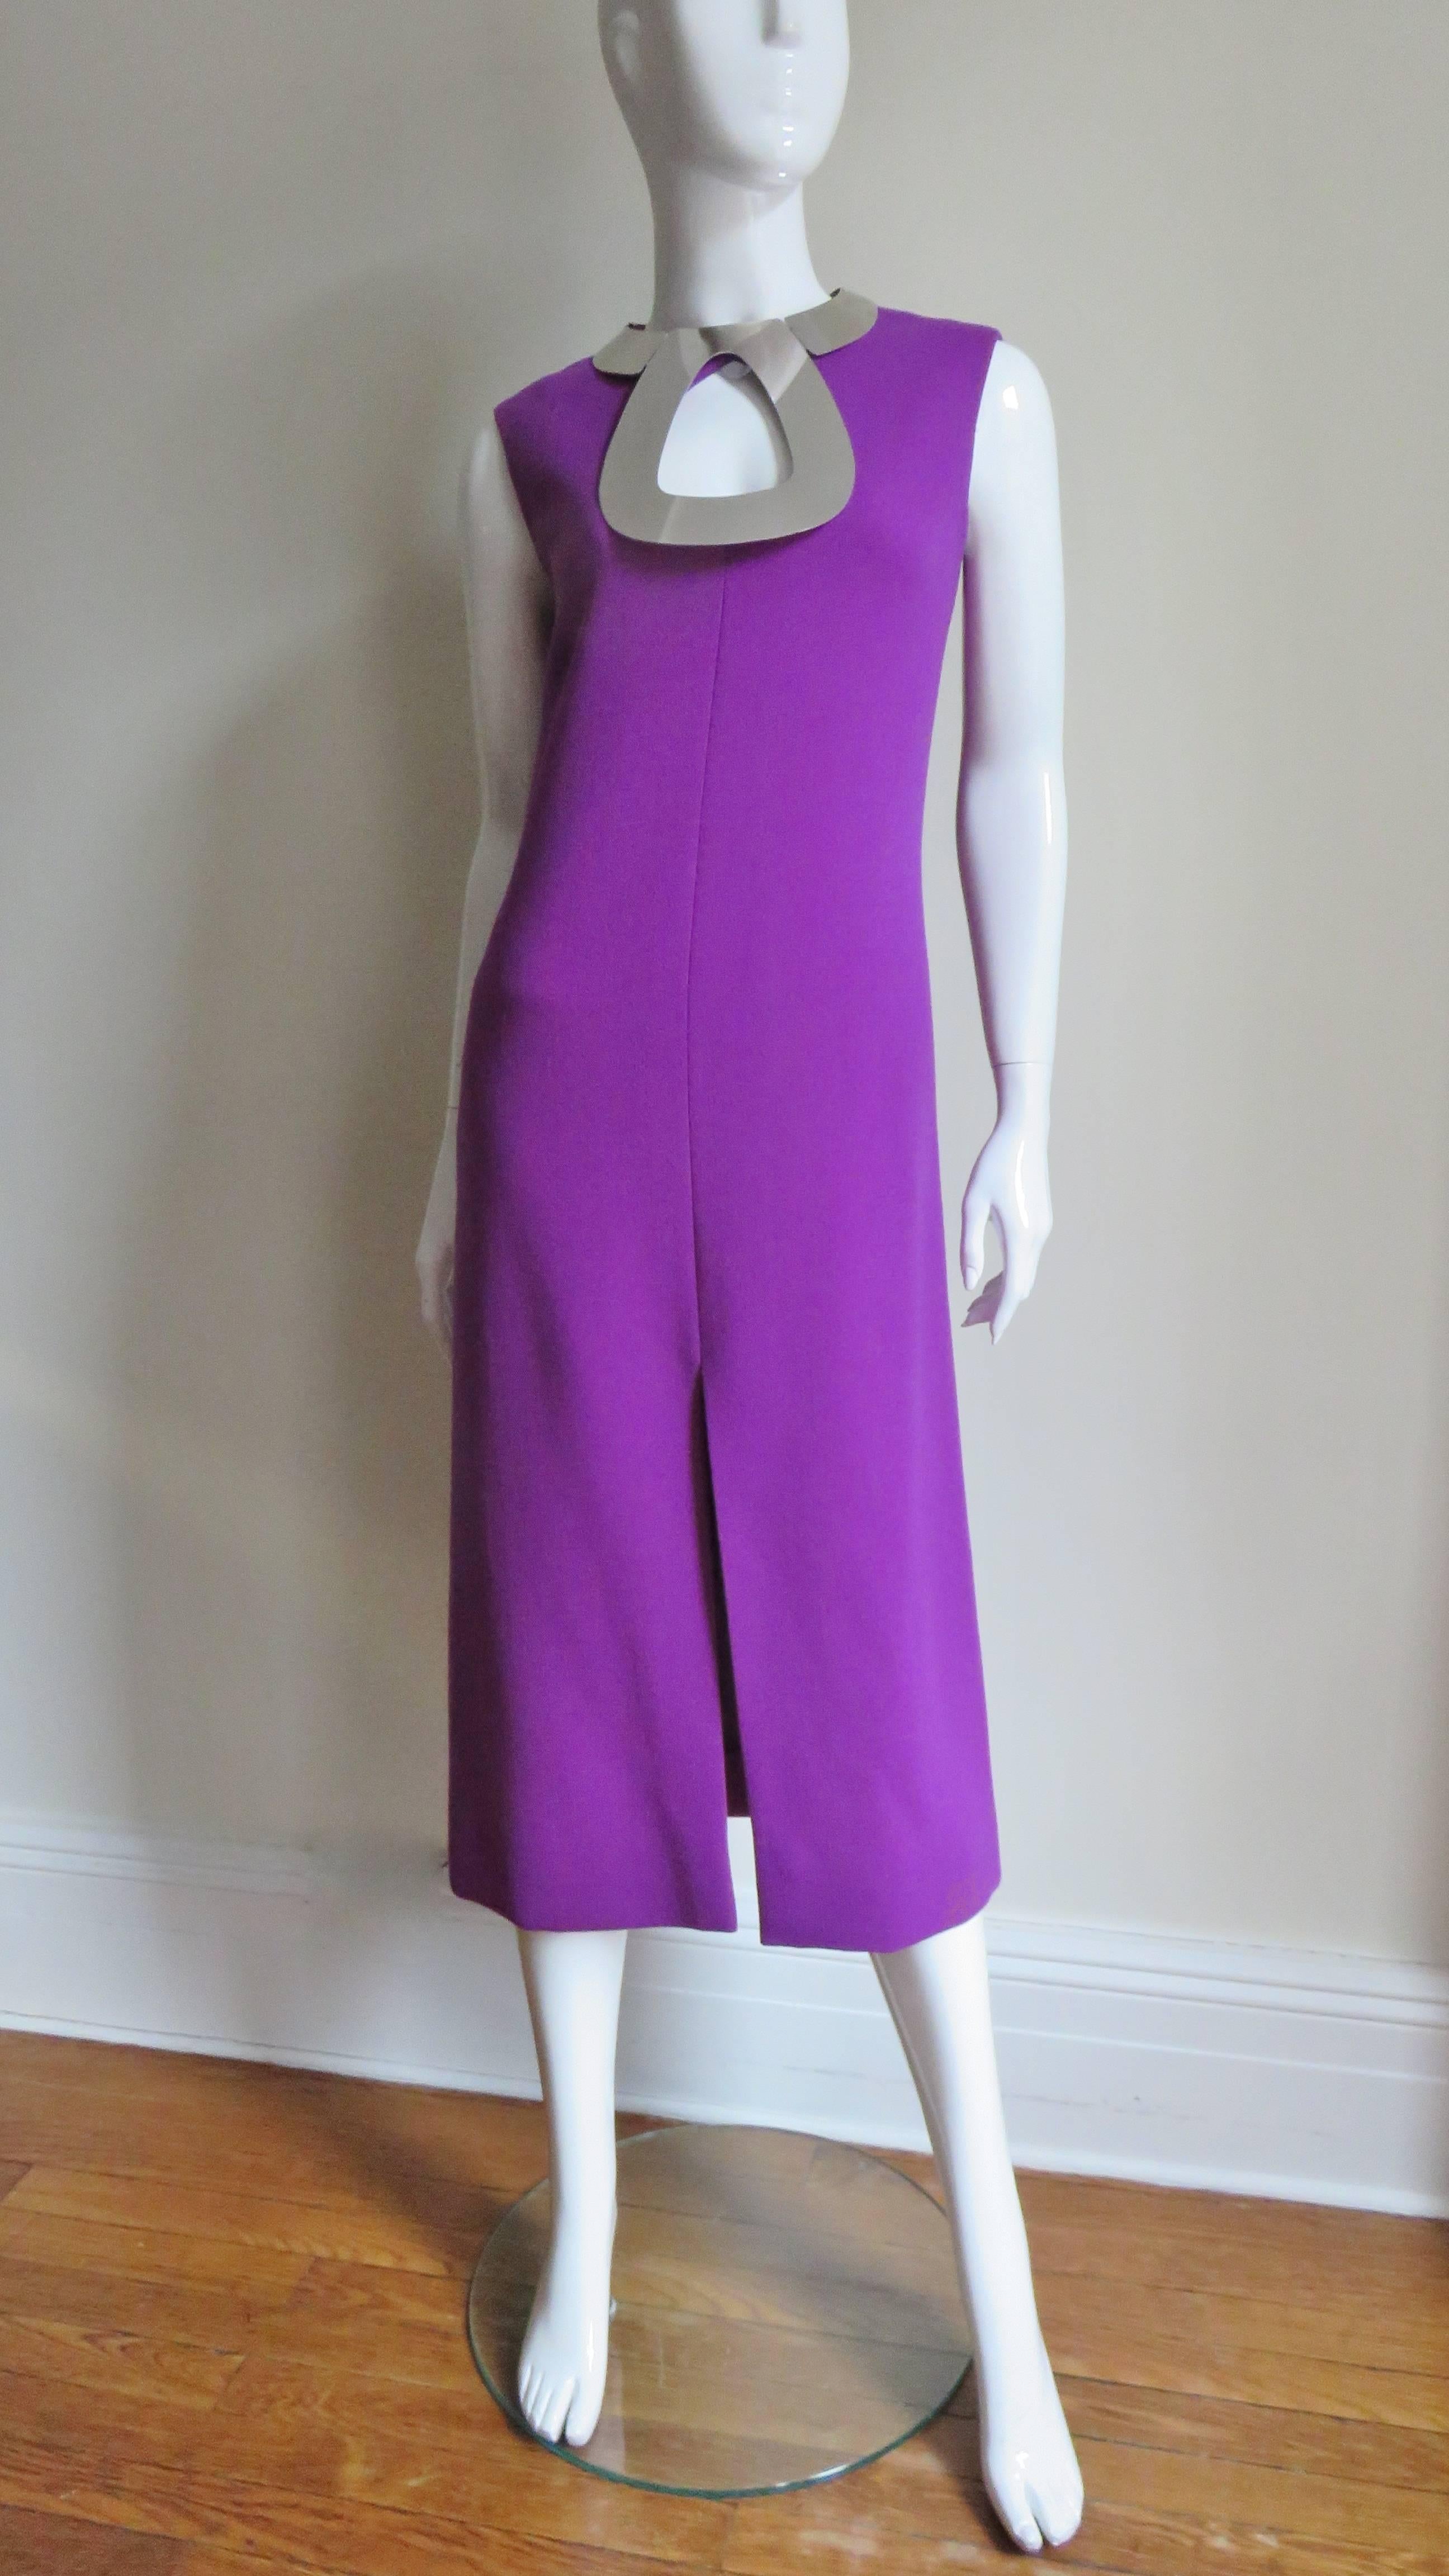  Pierre Cardin 1960s Iconic Metal Hardware Collar Dress For Sale 4